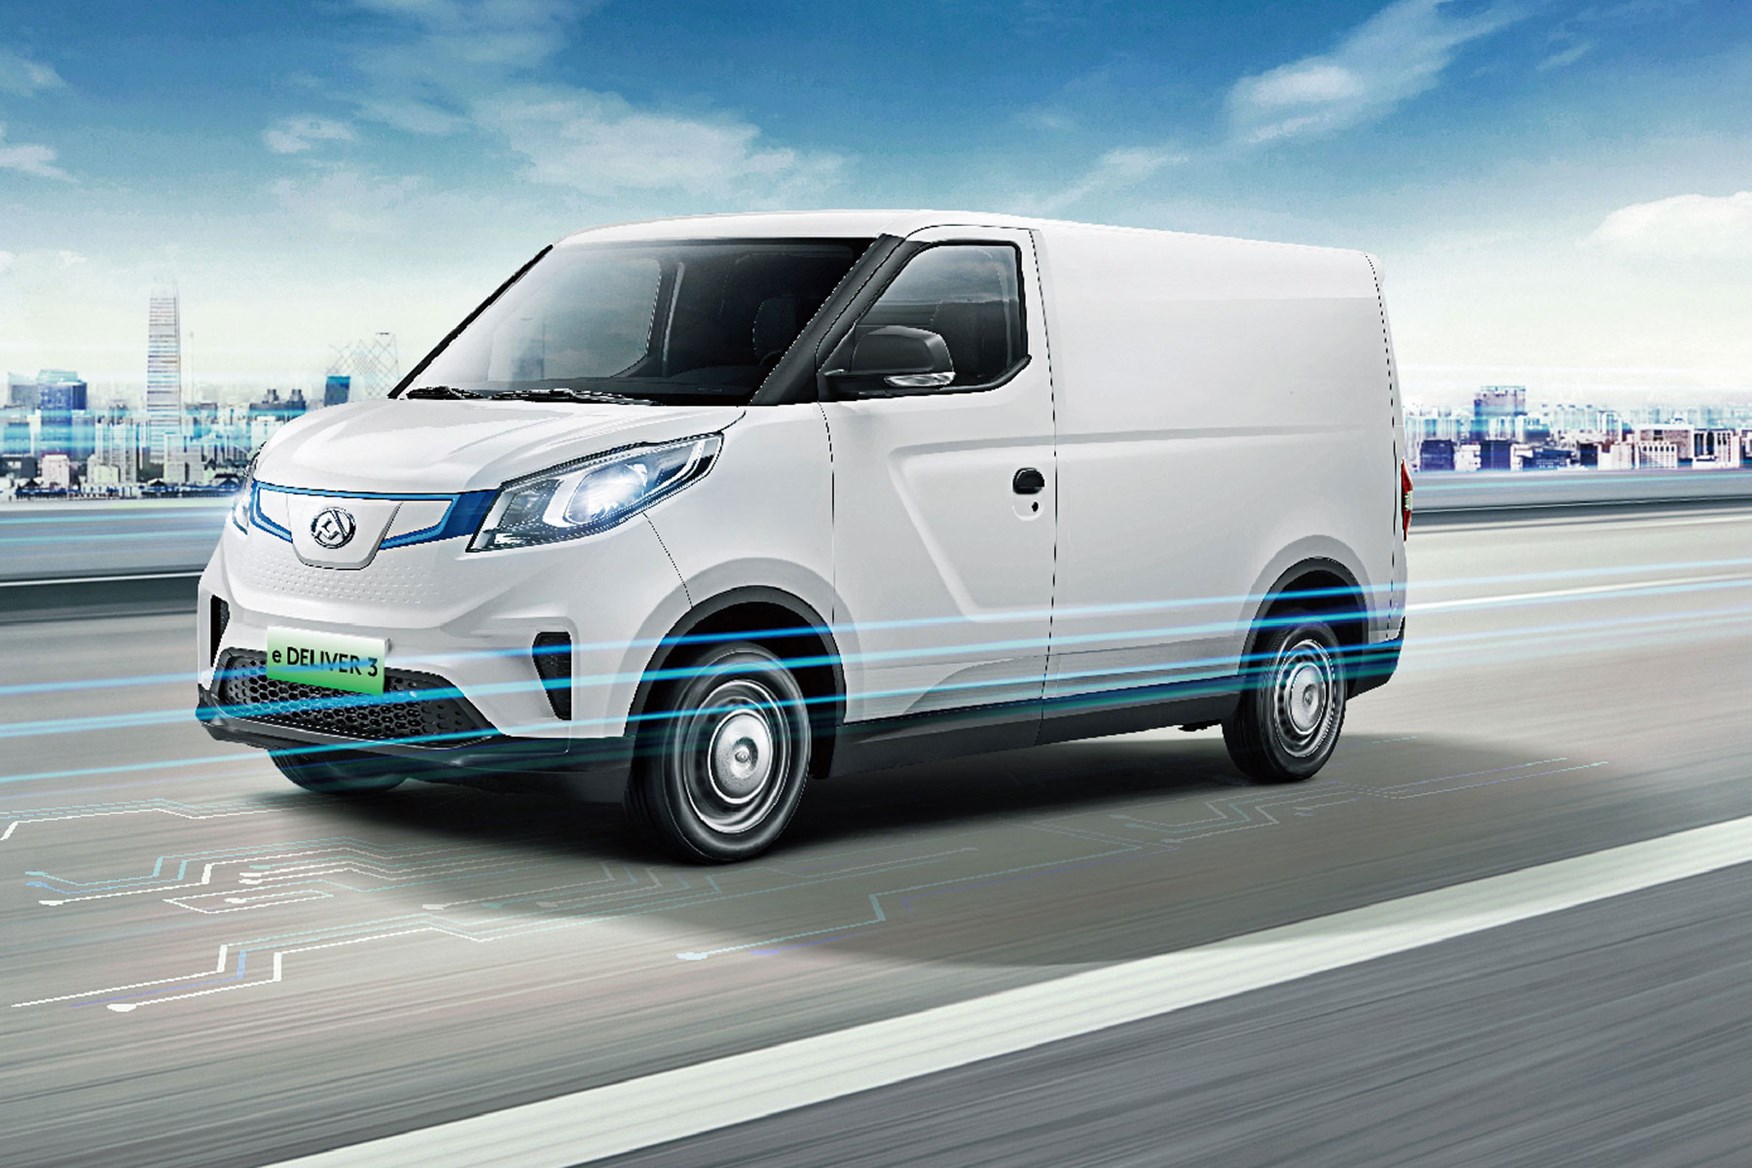 New Maxus e Deliver 3 is a purposebuilt electric van with 200mile